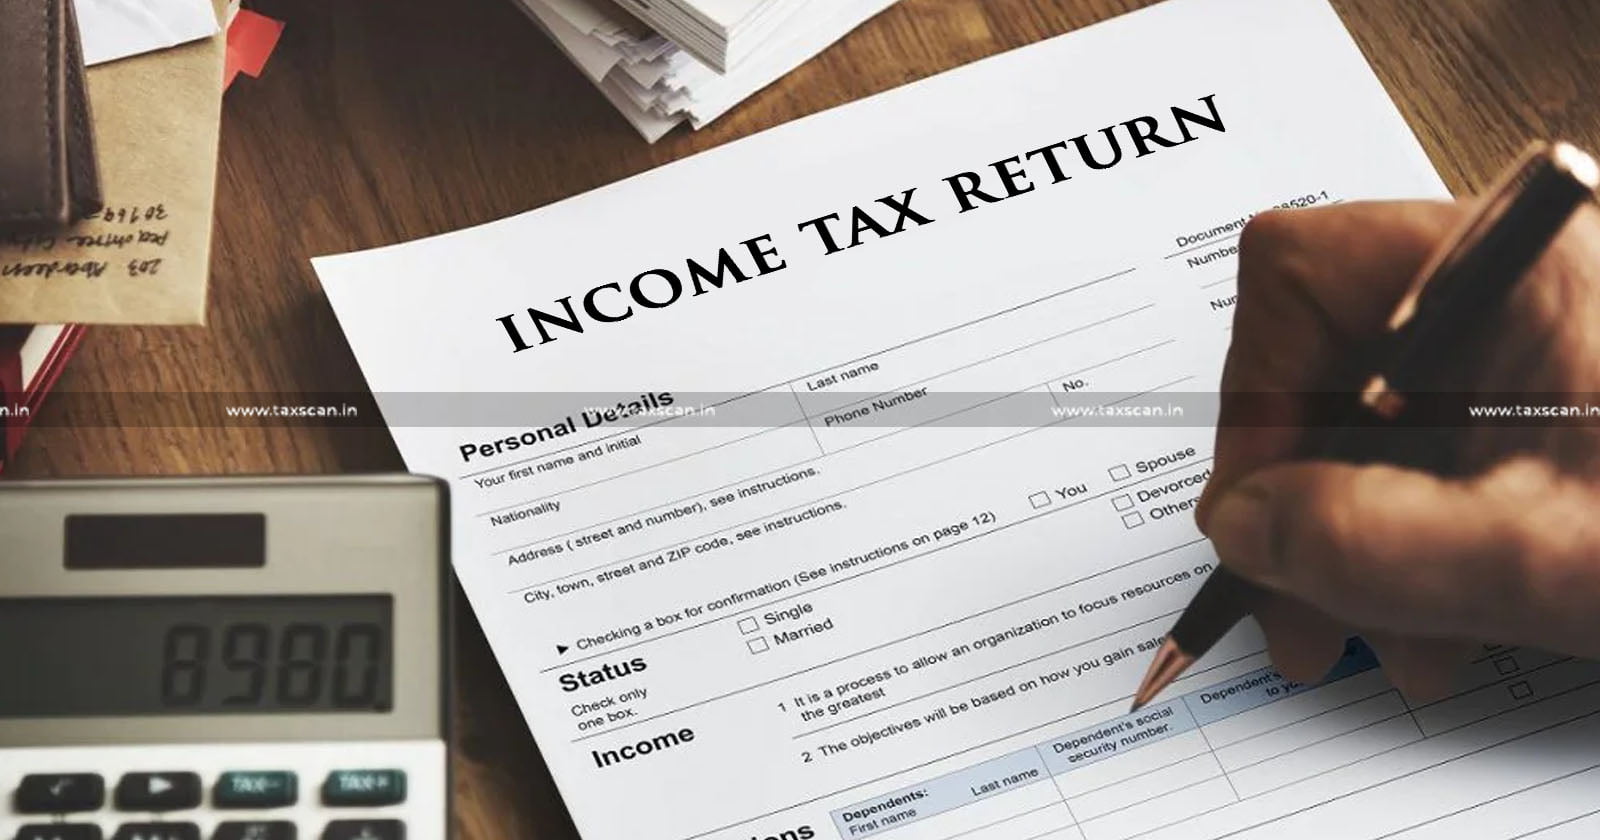 No Penalty can be Imposed - Penalty - Income Surrendered by Assessee During Survey - Income - Assessee - Survey - Regular Income Tax Return - Income Tax Return - ITAT - Taxscan